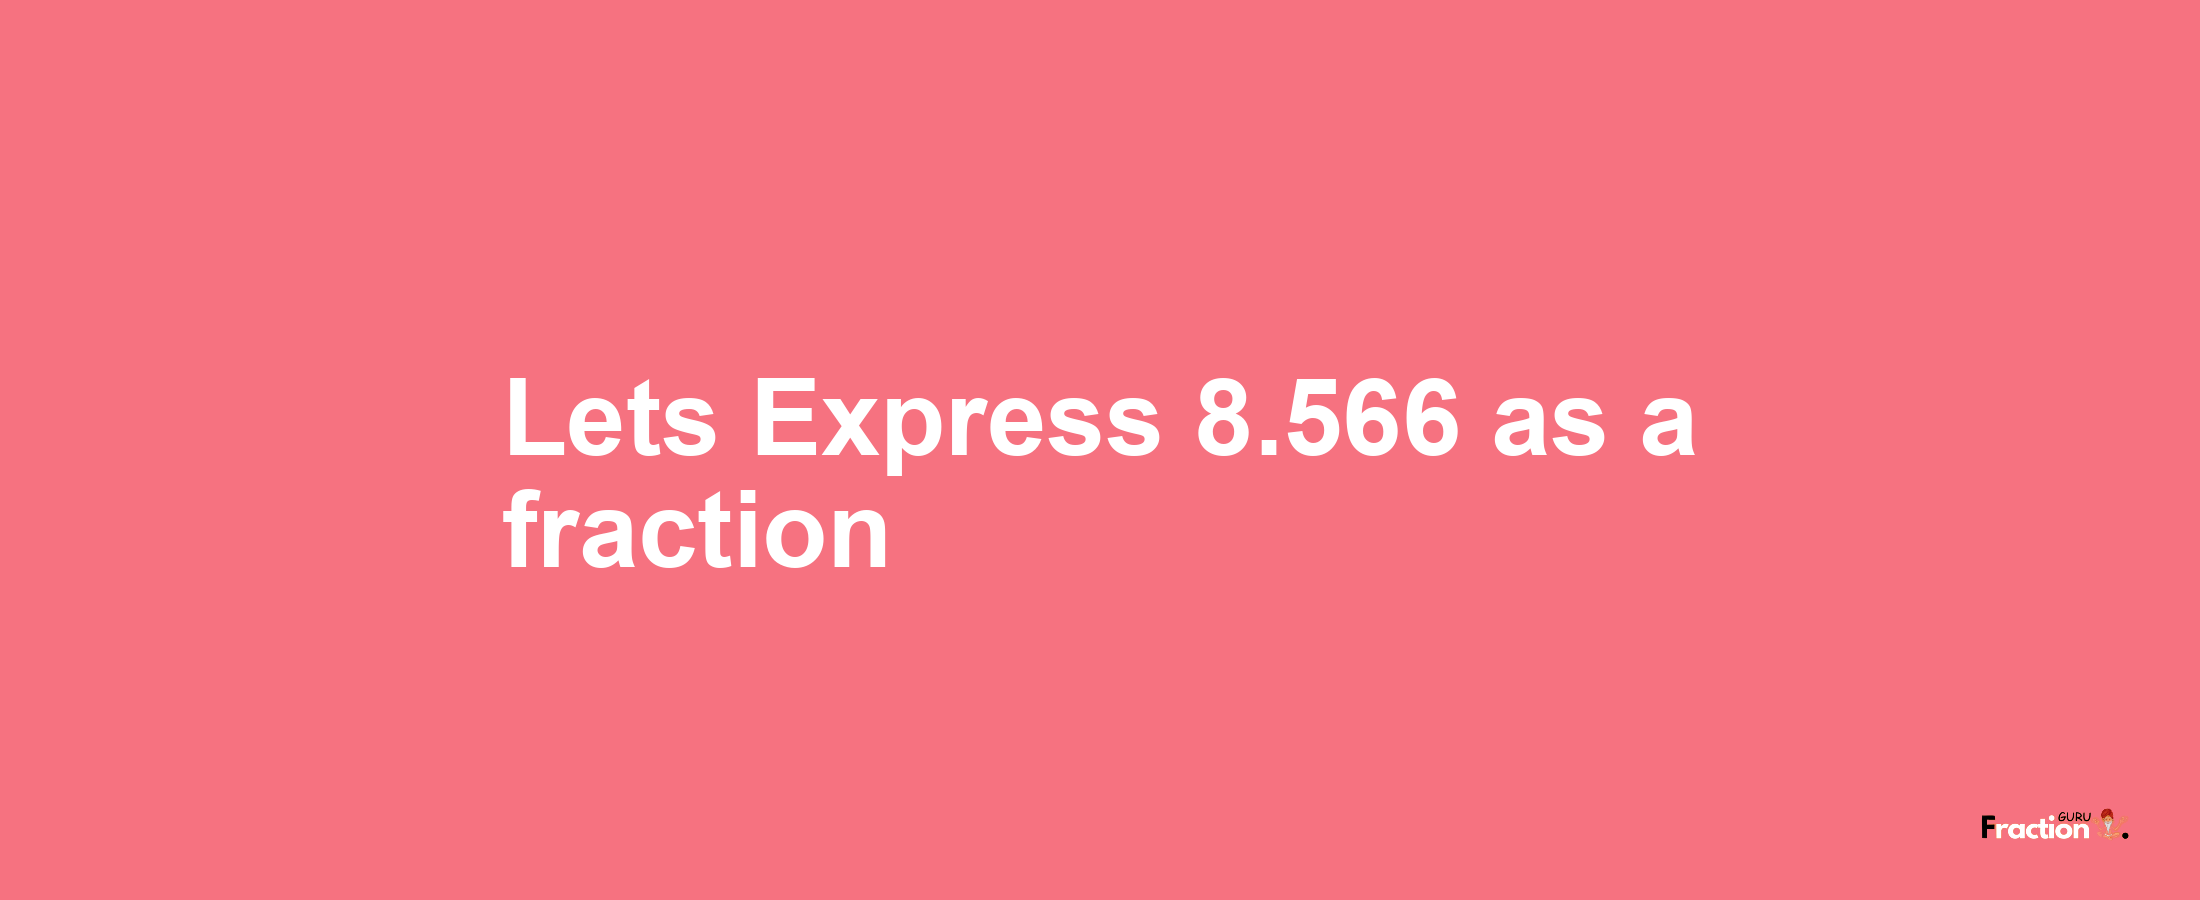 Lets Express 8.566 as afraction